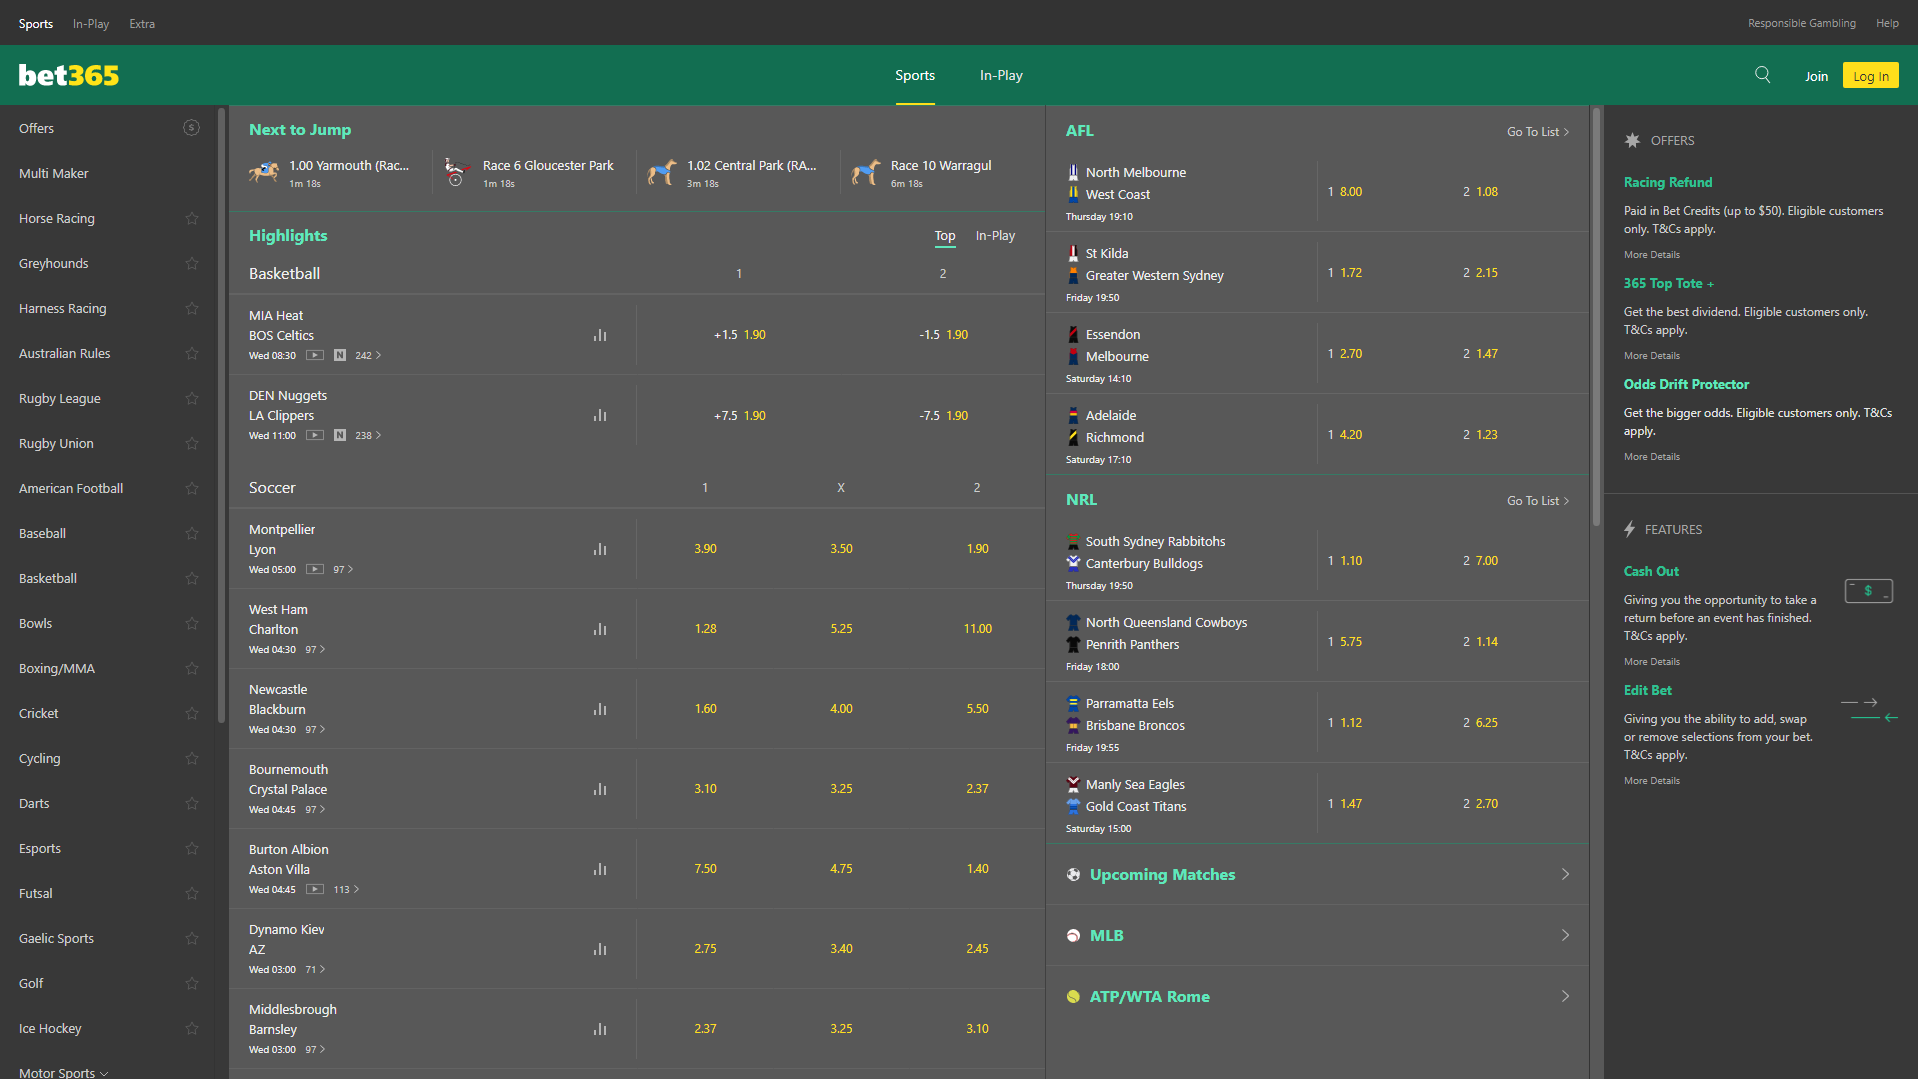 Free Bet365 Offers, Bonus Bets and Promos